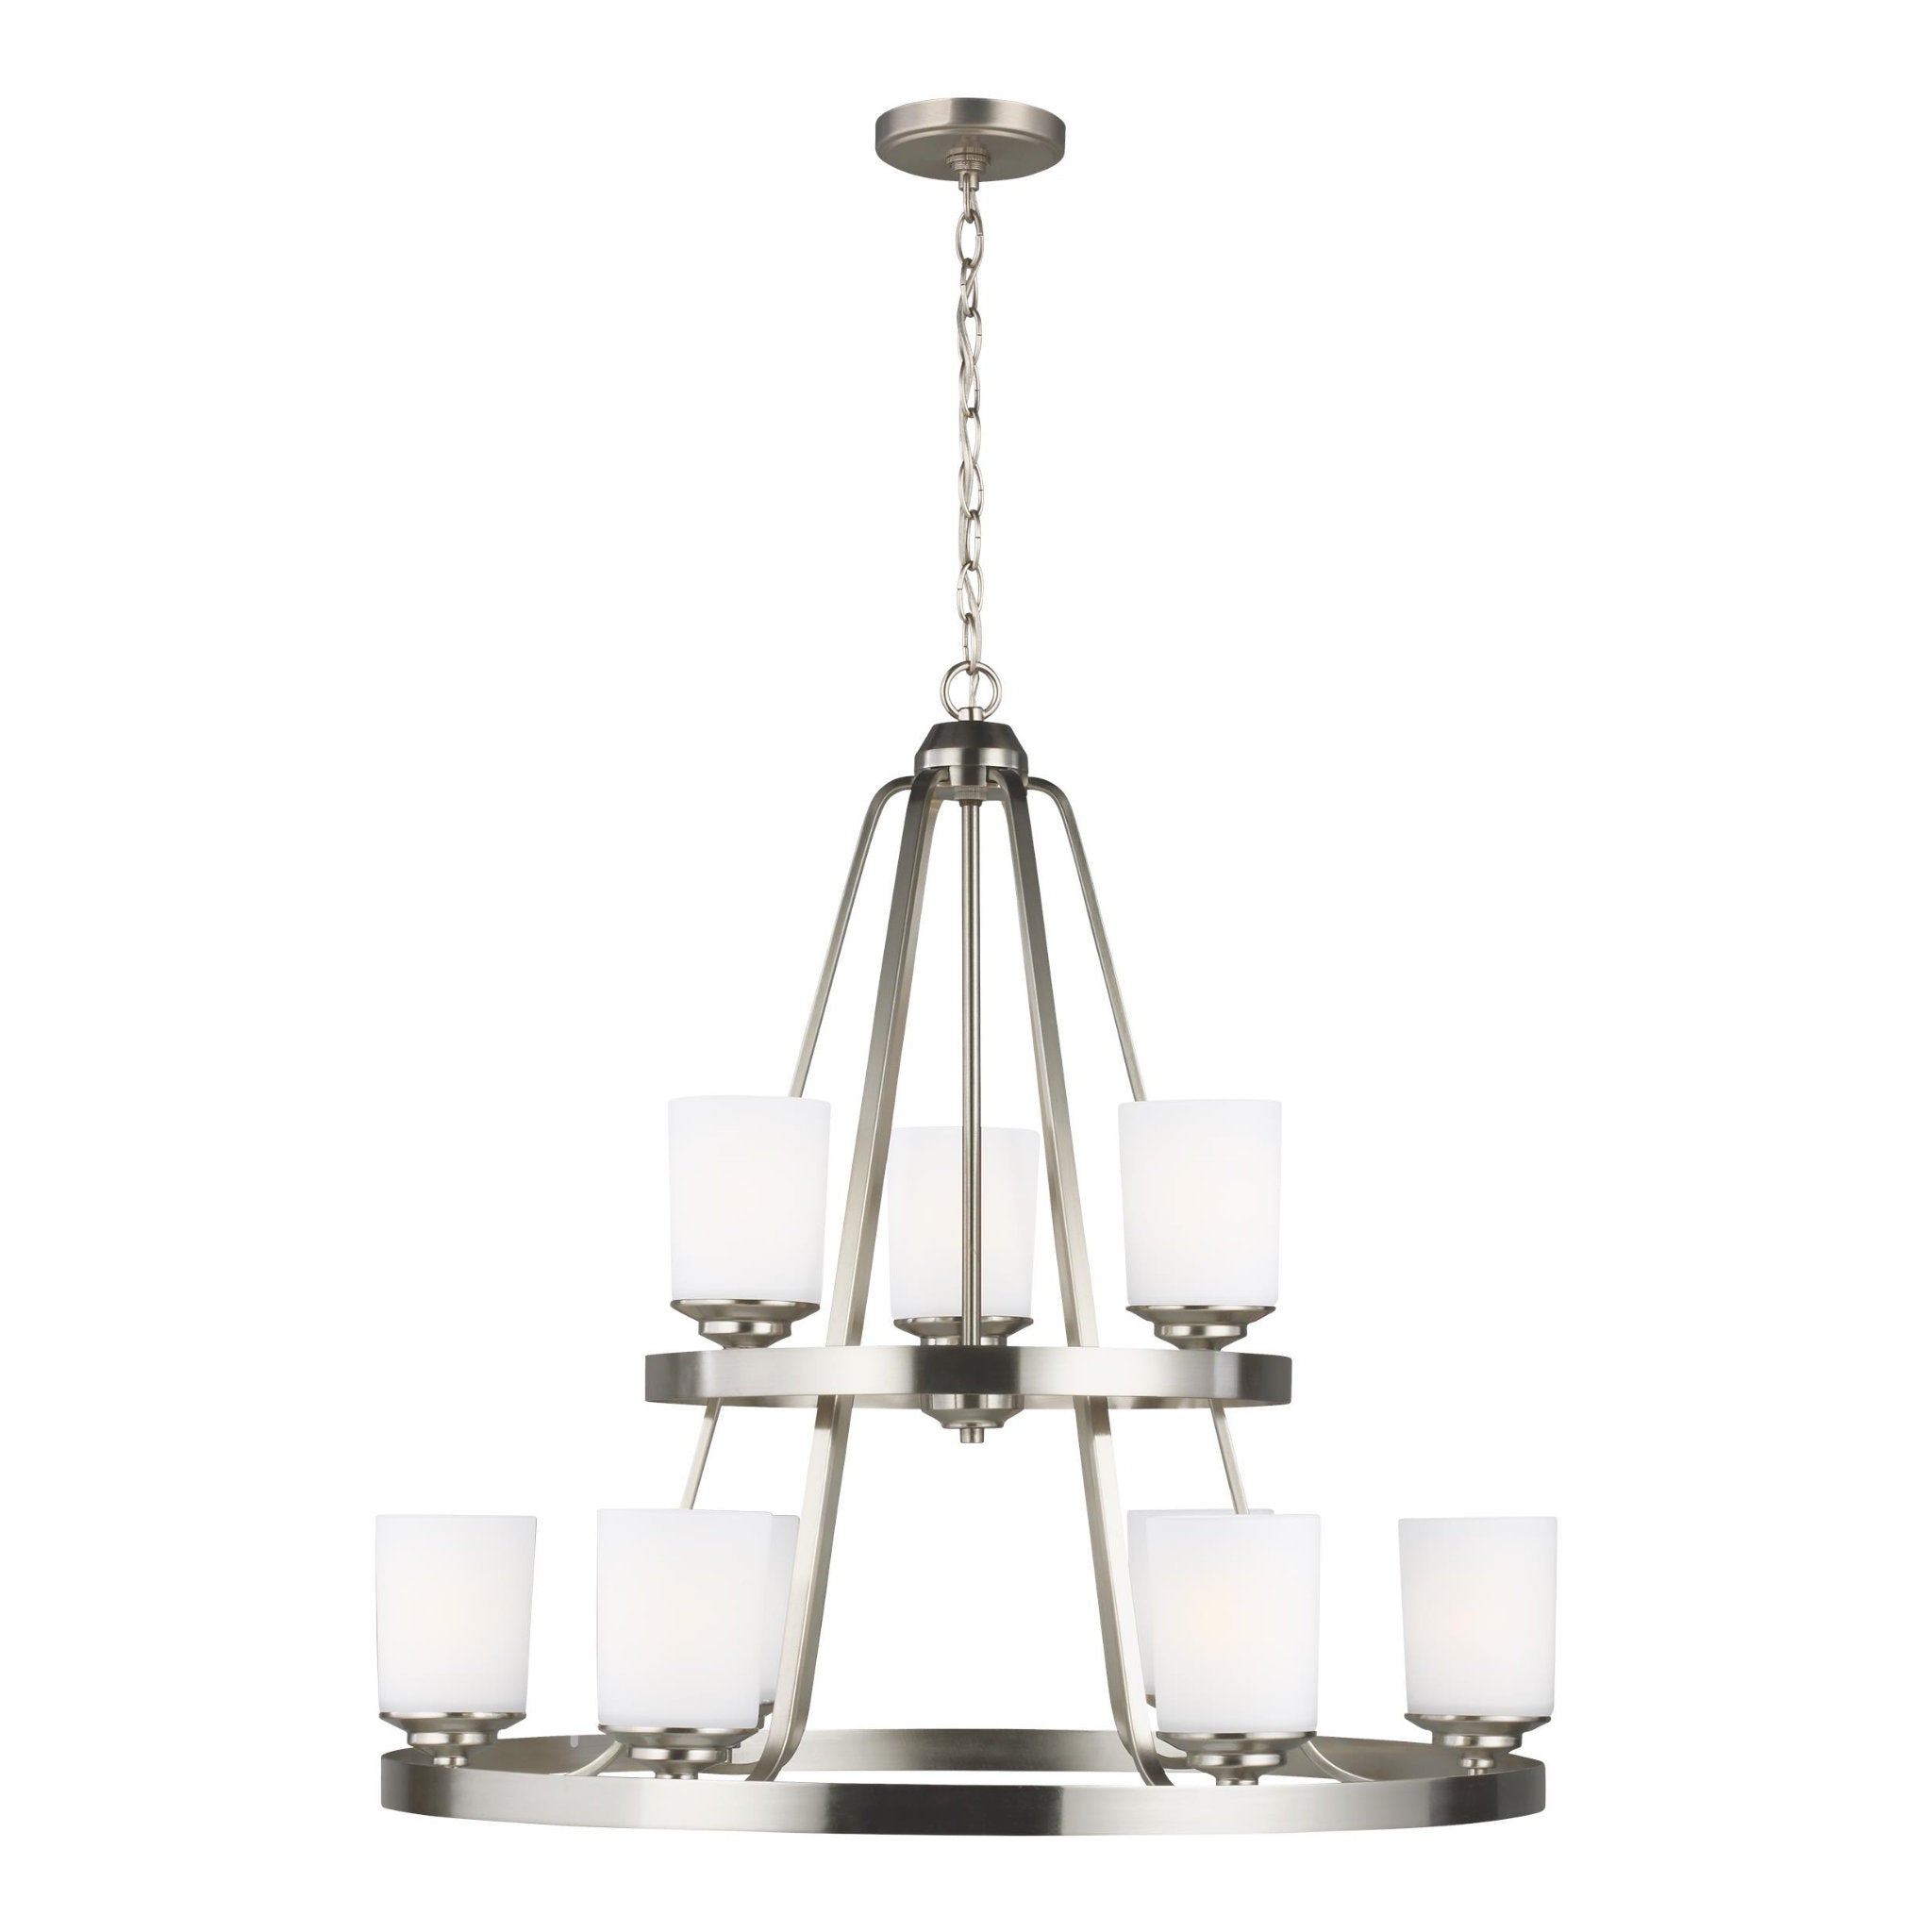 Kemal Nine Light Chandelier Transitional 29" Height Steel Round Etched / White Inside Shade in Brushed Nickel